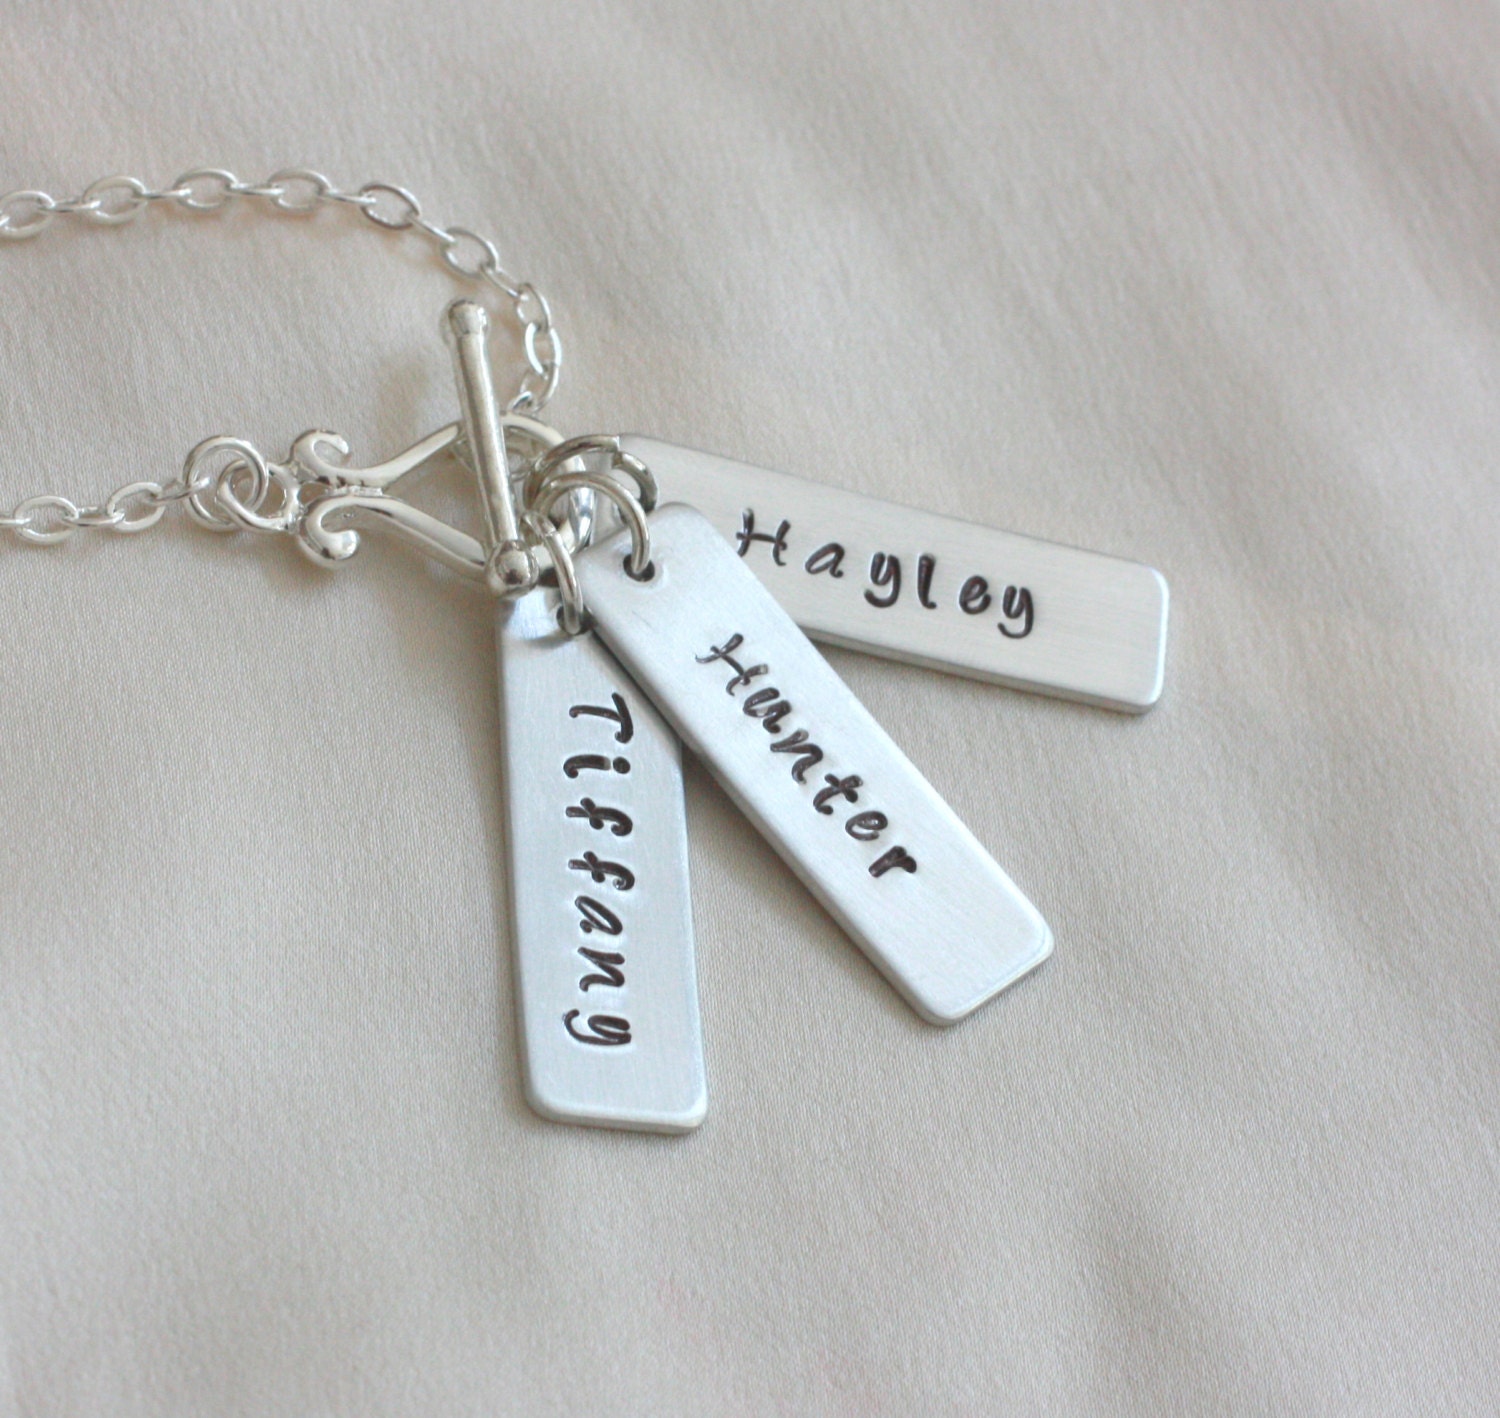 Name Tag Toggle Clasp Necklace Personalized by CrossEarth on Etsy